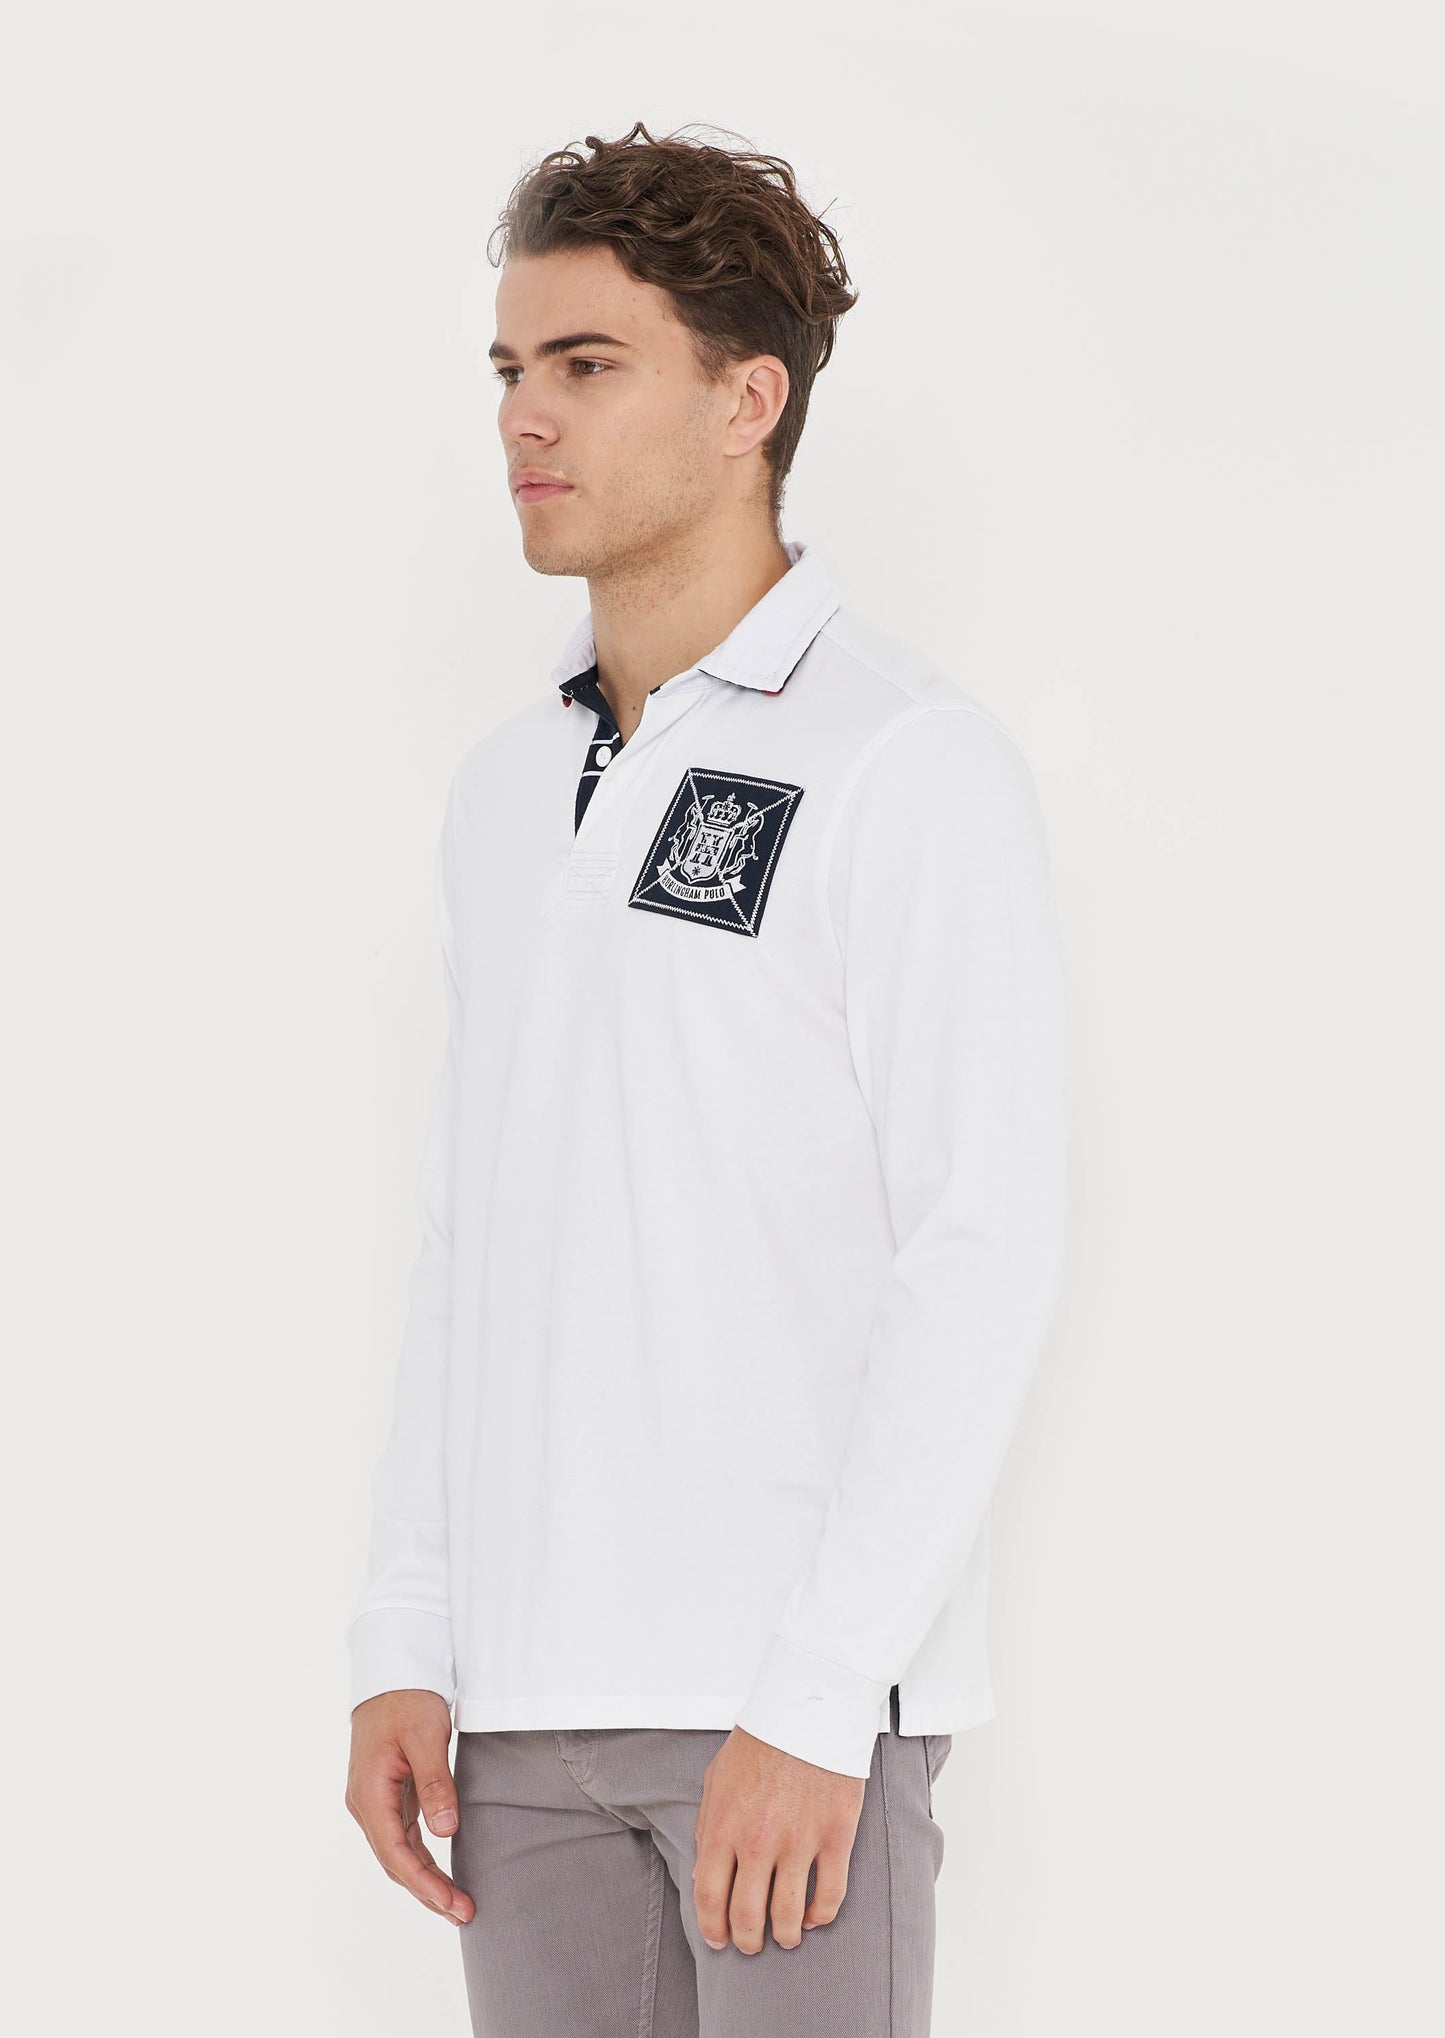 Classic Rugby Shirt - White